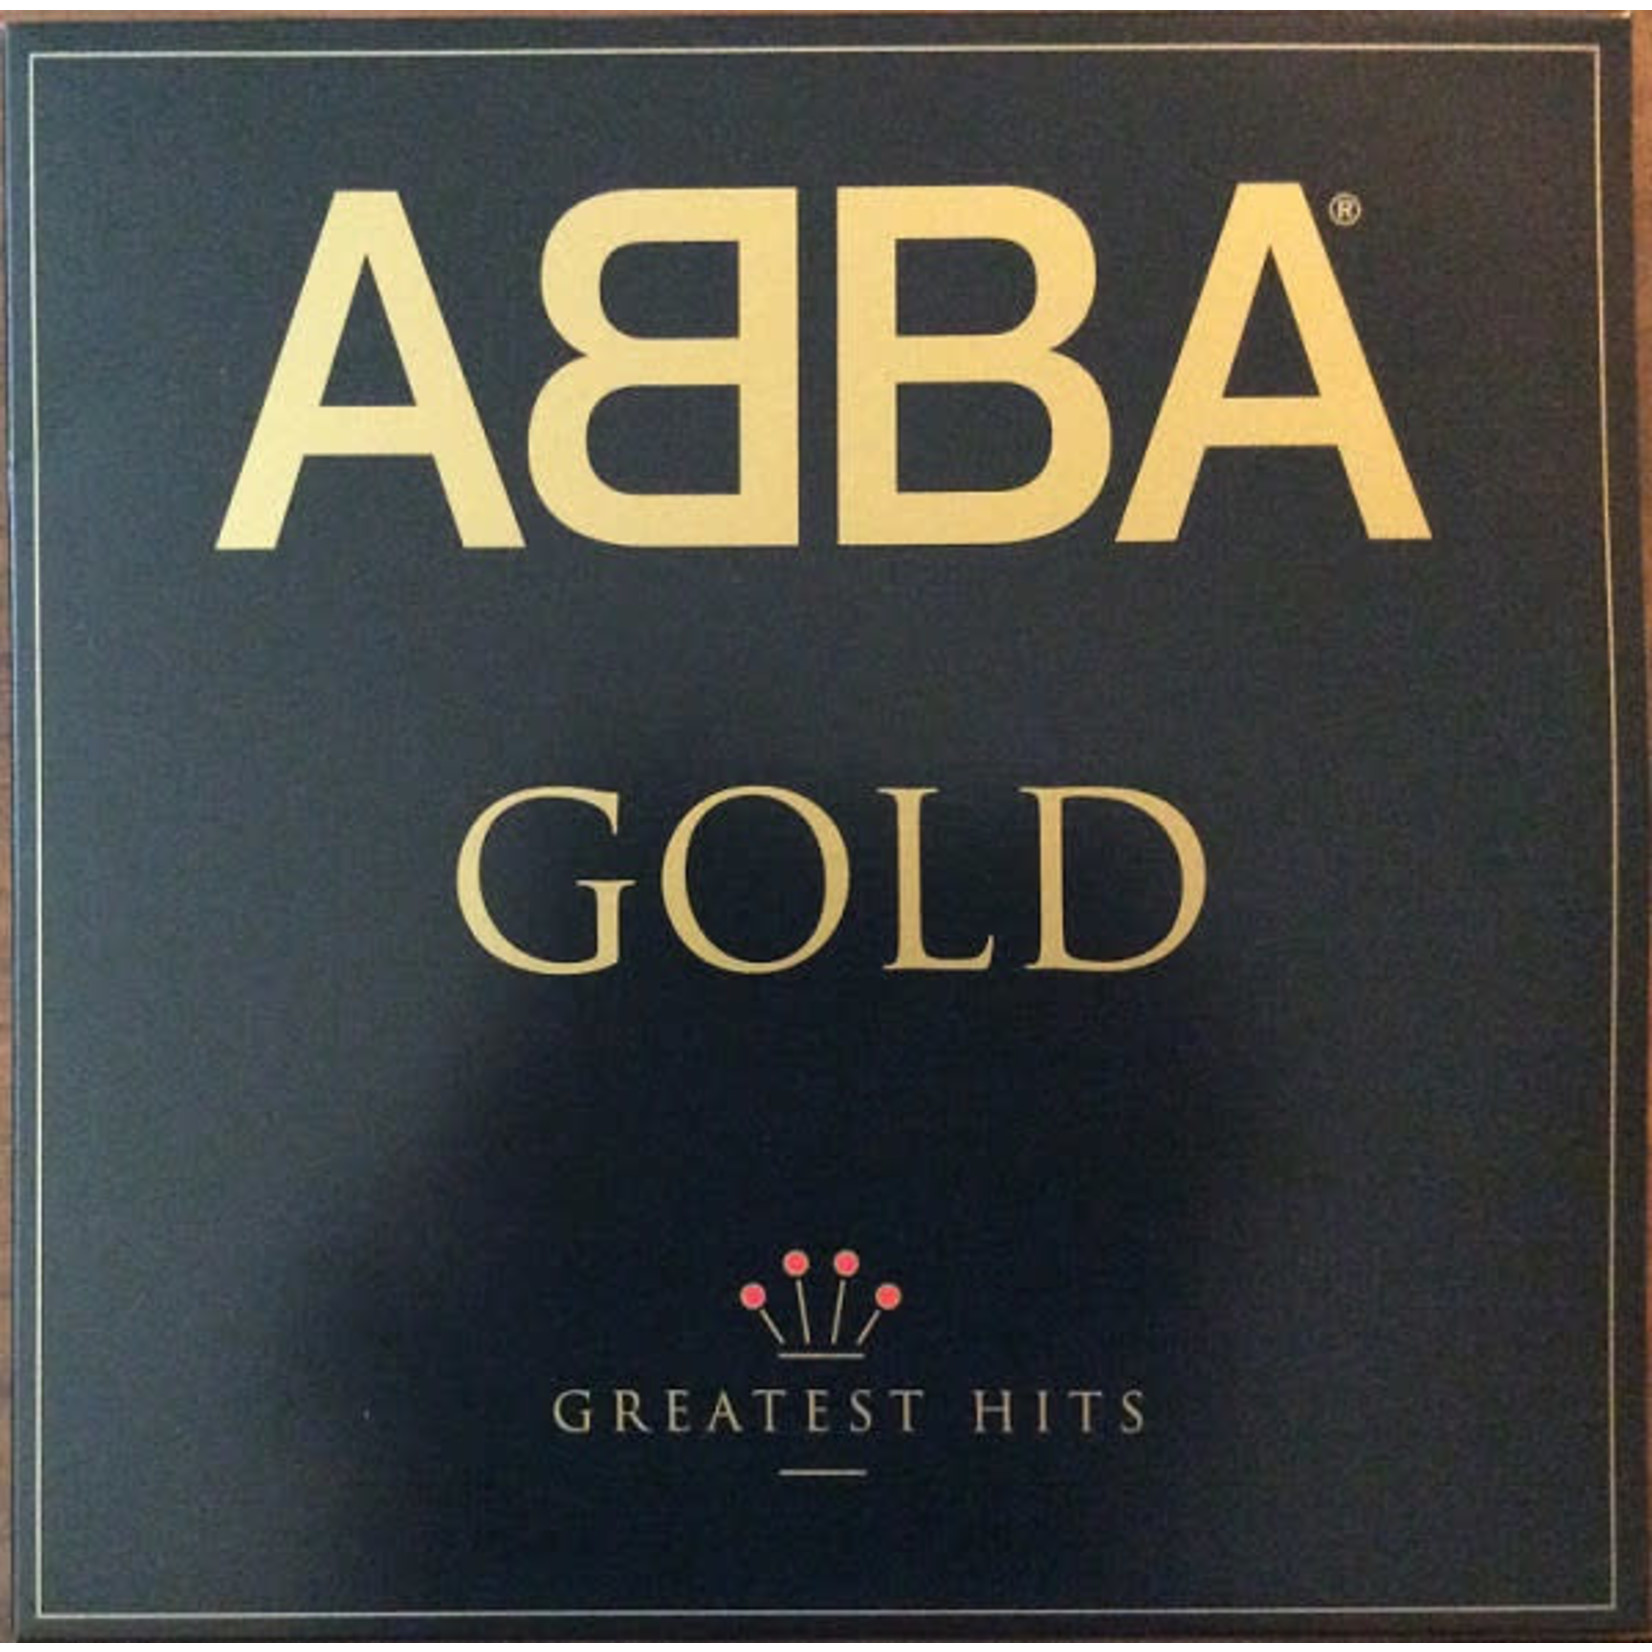 Polydor ABBA - Gold: Greatest Hits (2LP)